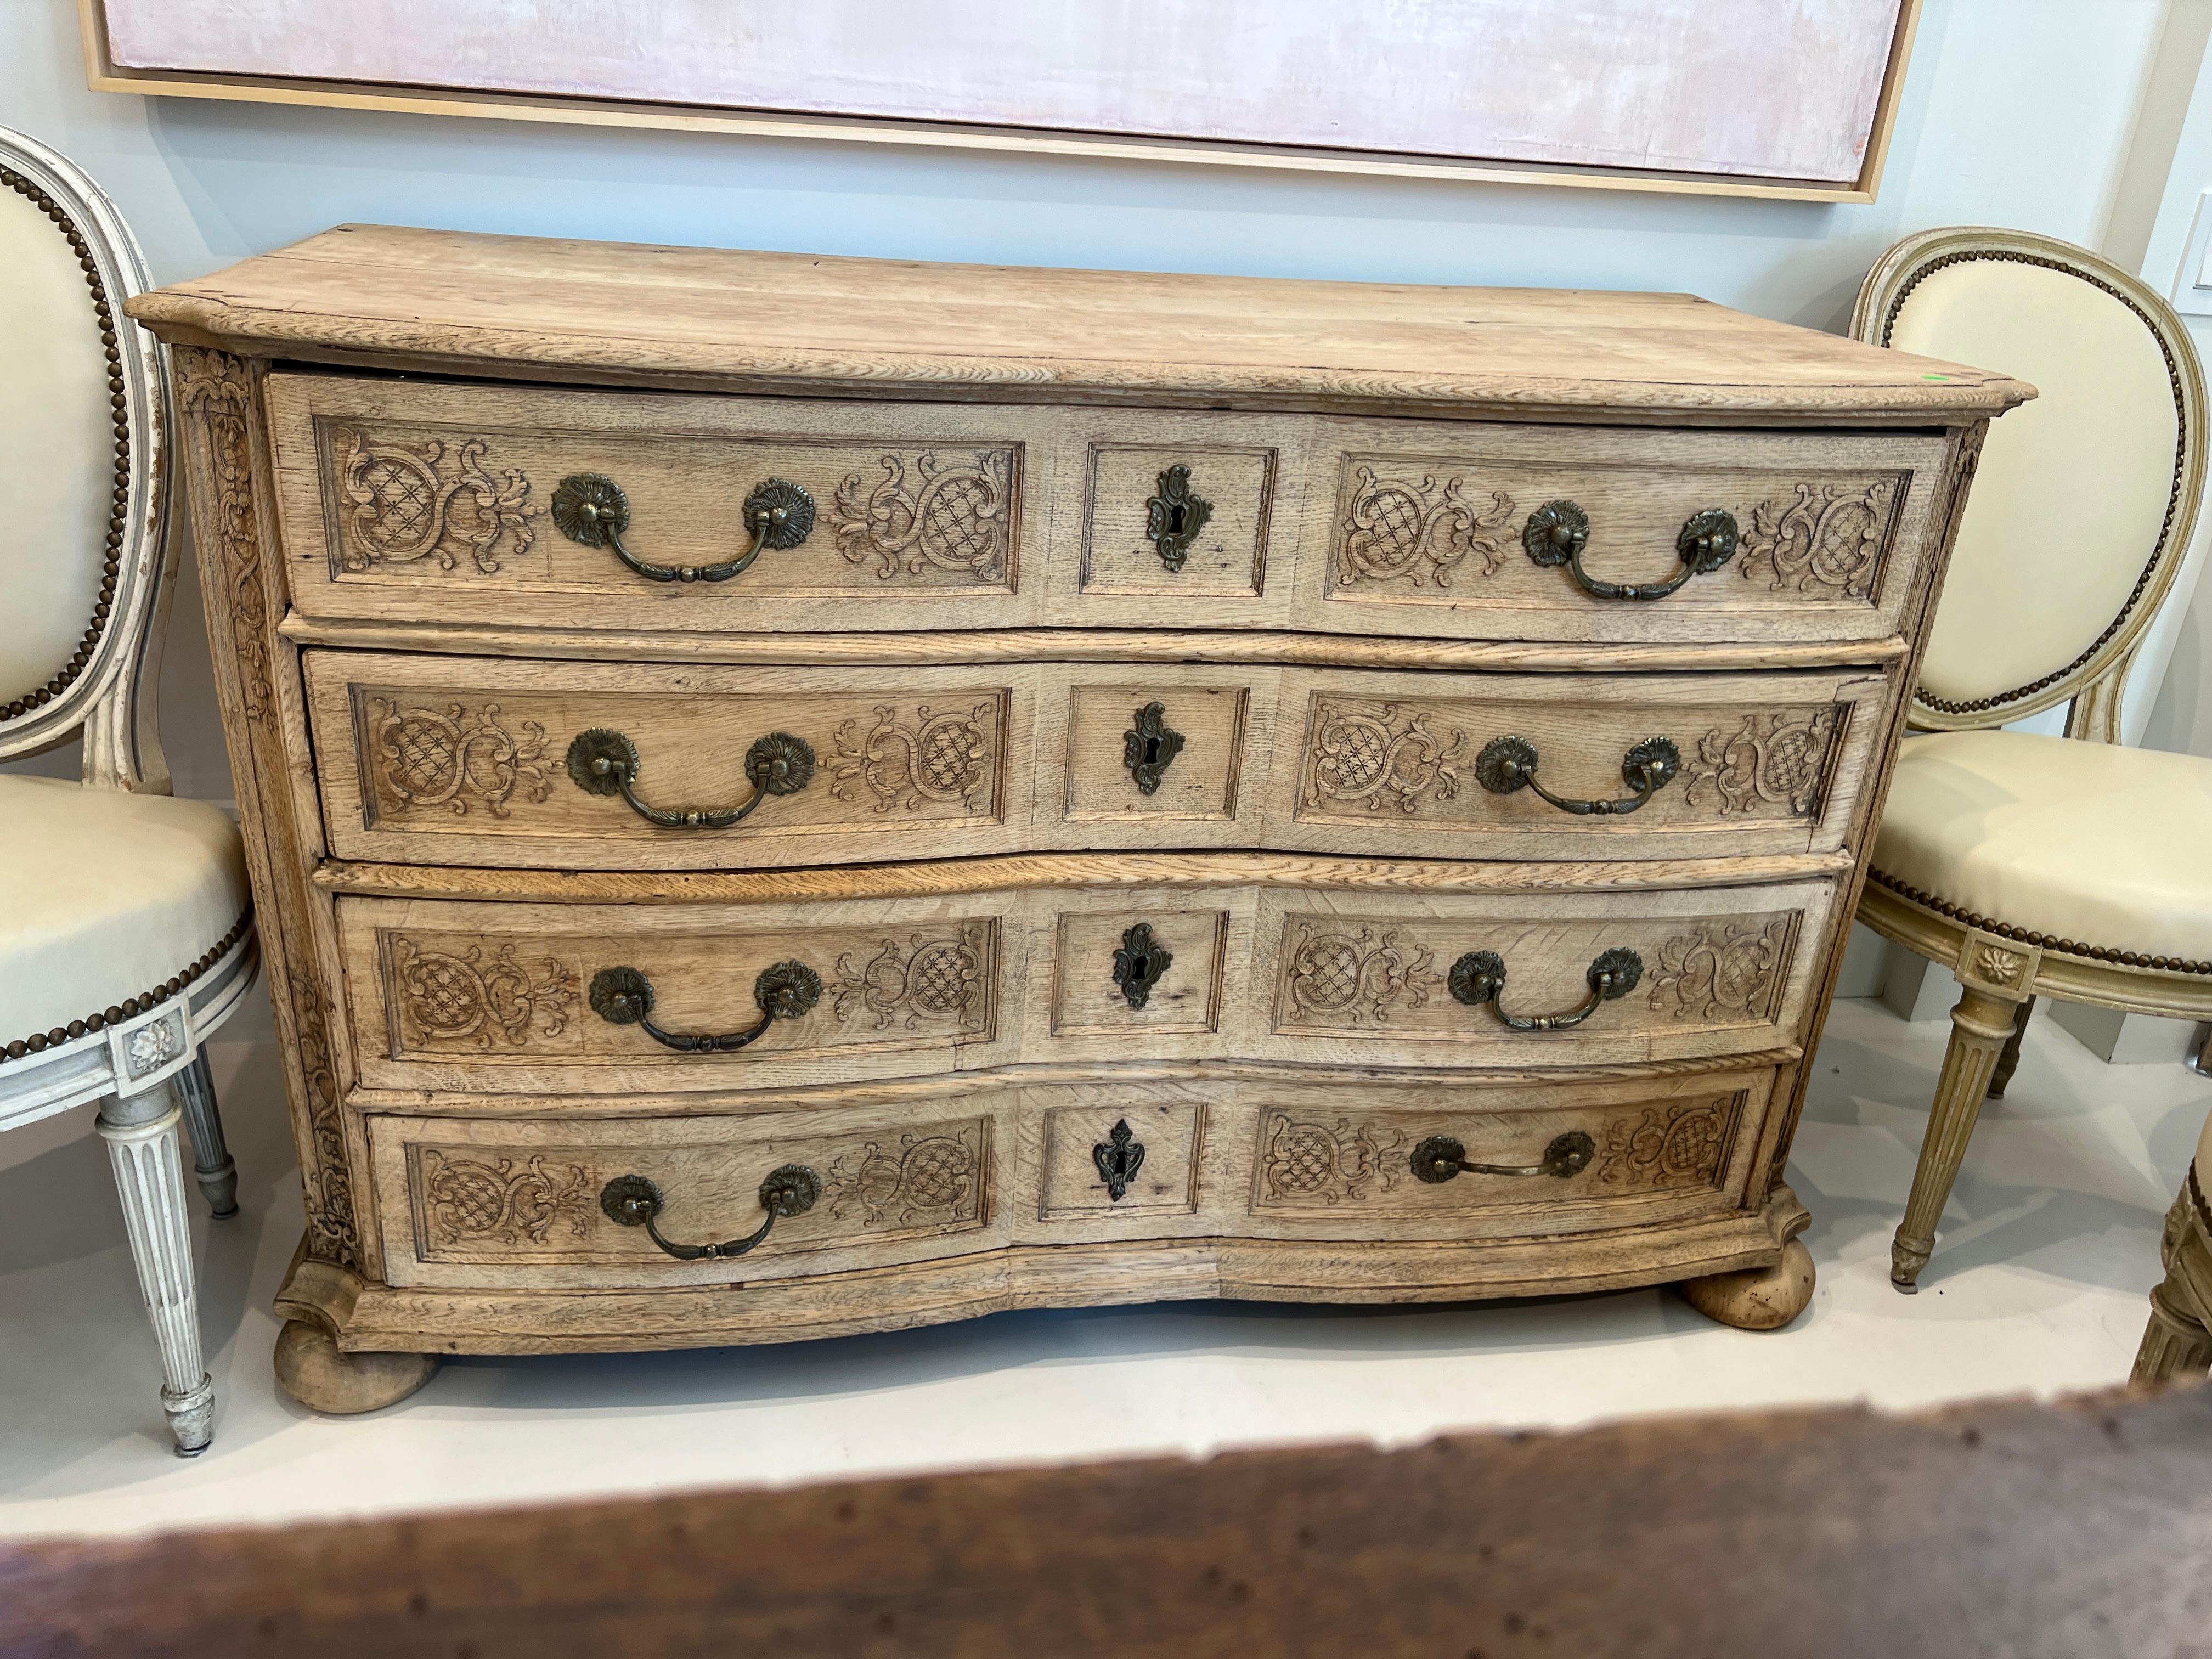 Softly undulating front with so many special details, this 18th century bleached oak chest has a style of carving specific to its town of Liege Belgium. Its pale color allows for the subtly carved details to stand out. The softness theme is repeated